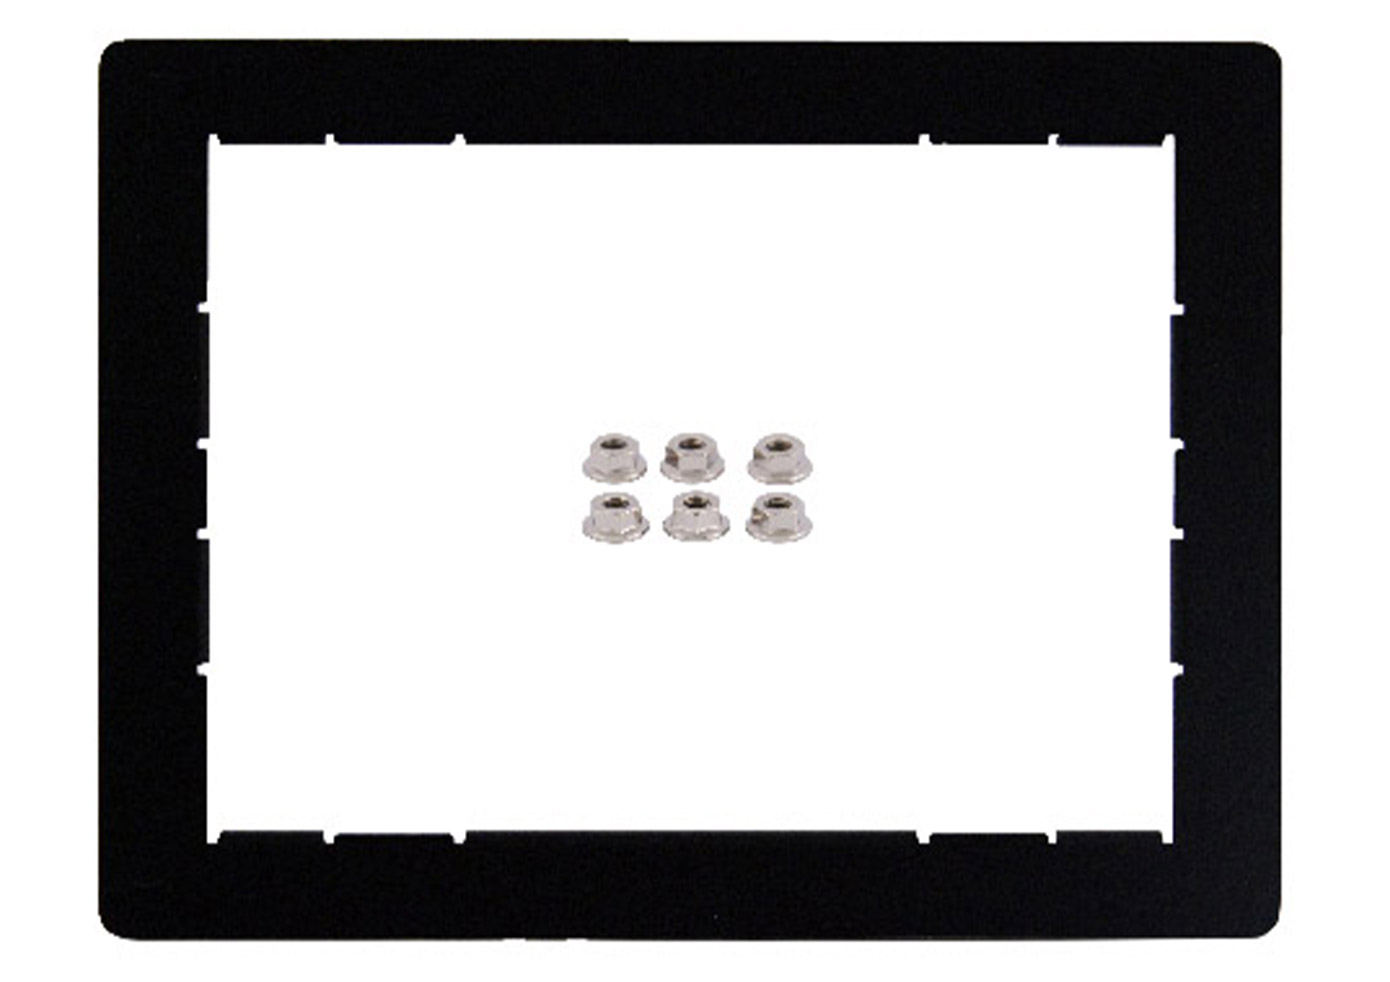 Panel Cutout Adapter Plate [8" to 7"]<br/>

<span class="clsSpnProdMdls">For HMI530 to HMI5070, cMT3071, cMT3072</span>